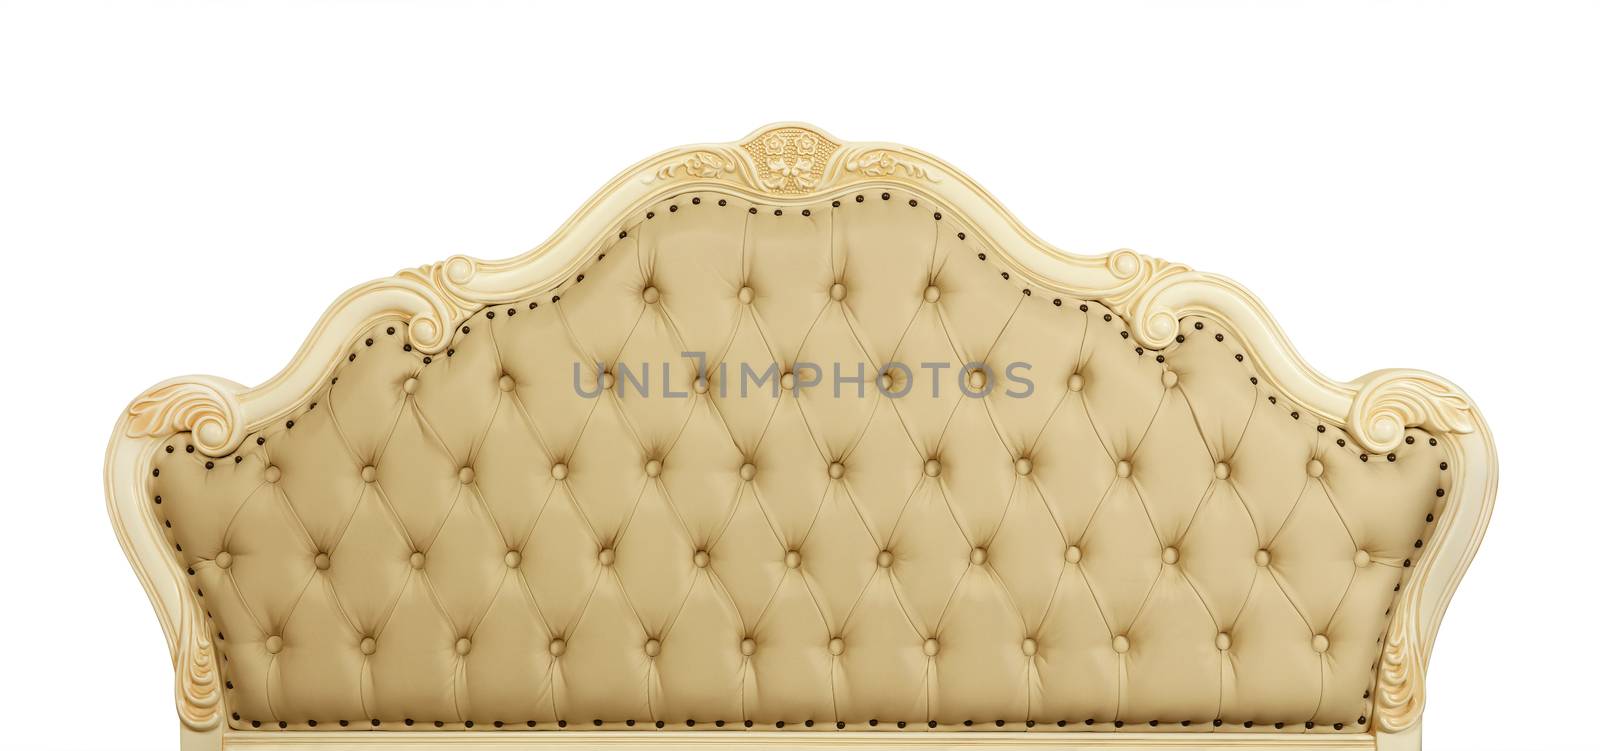 Beige leather bed headboard isolated on white by BreakingTheWalls